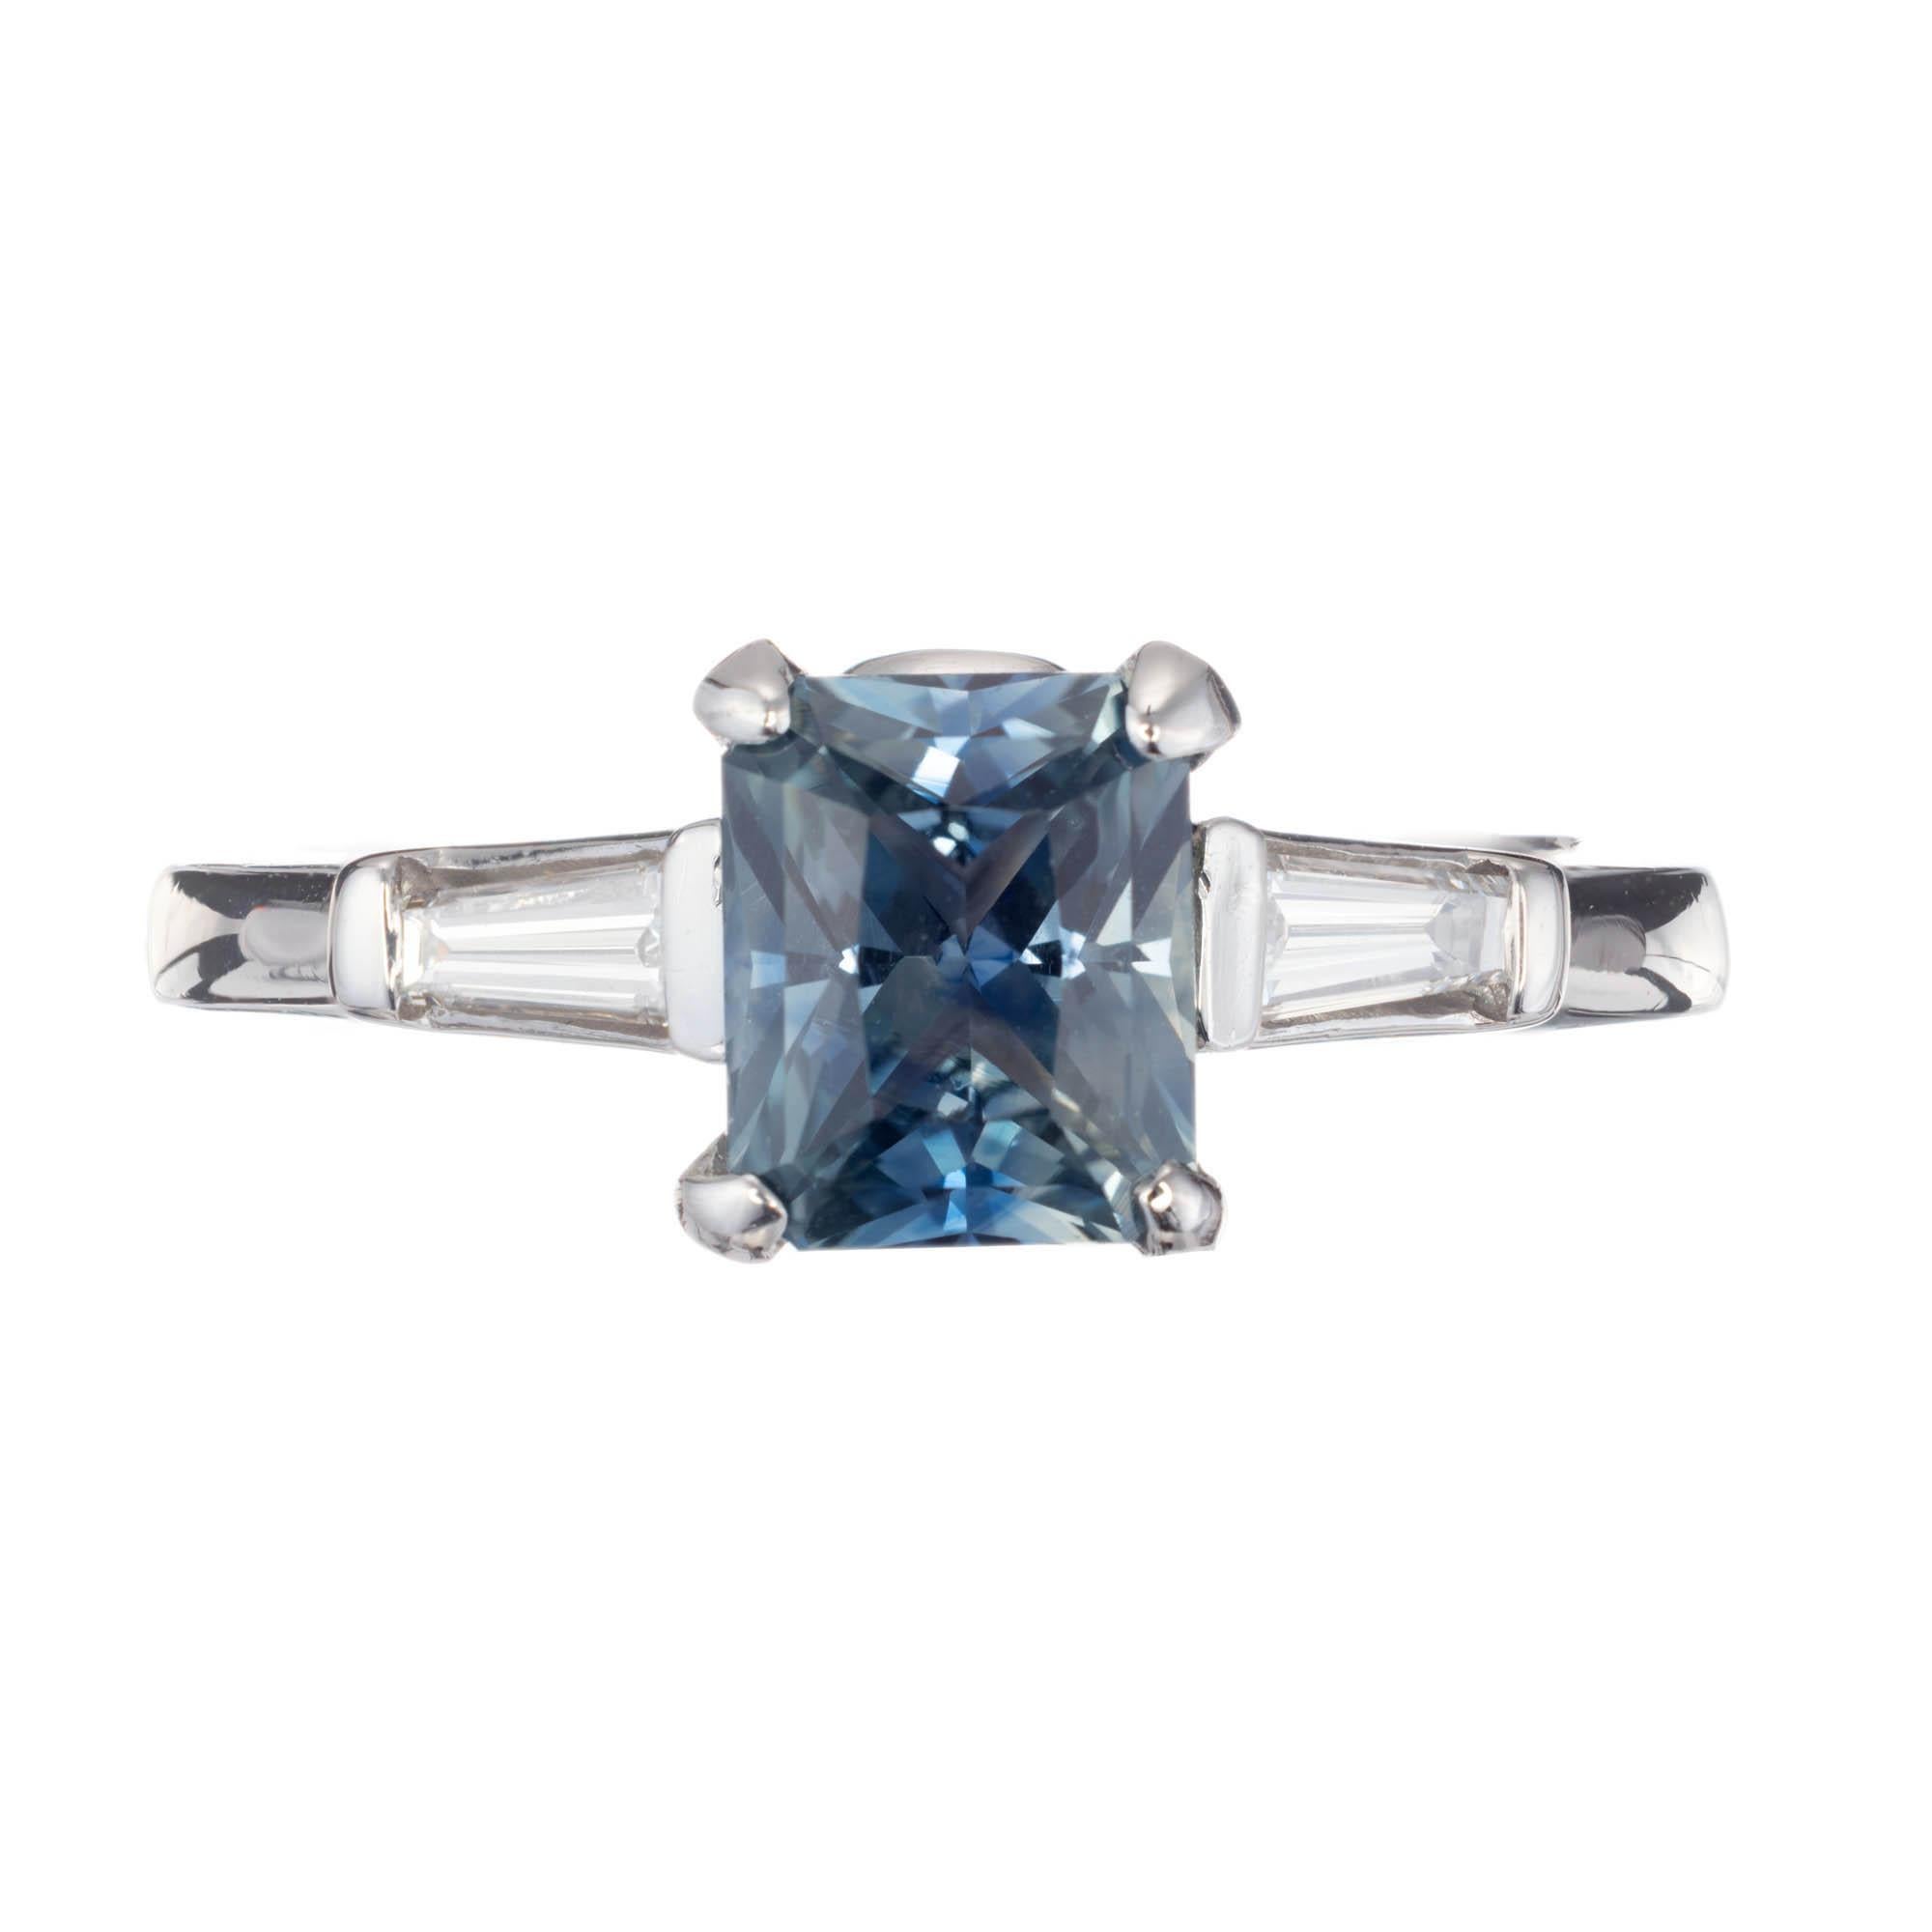 Vintage 1950s green blue Sapphire and Diamond Engagement Ring. Certified GIA sapphire center stone, accented with 2 tapered baguette diamonds on each site of the platinum setting. 

1 octagonal greenish blue sapphire, Approximate 1.59 carats GIA